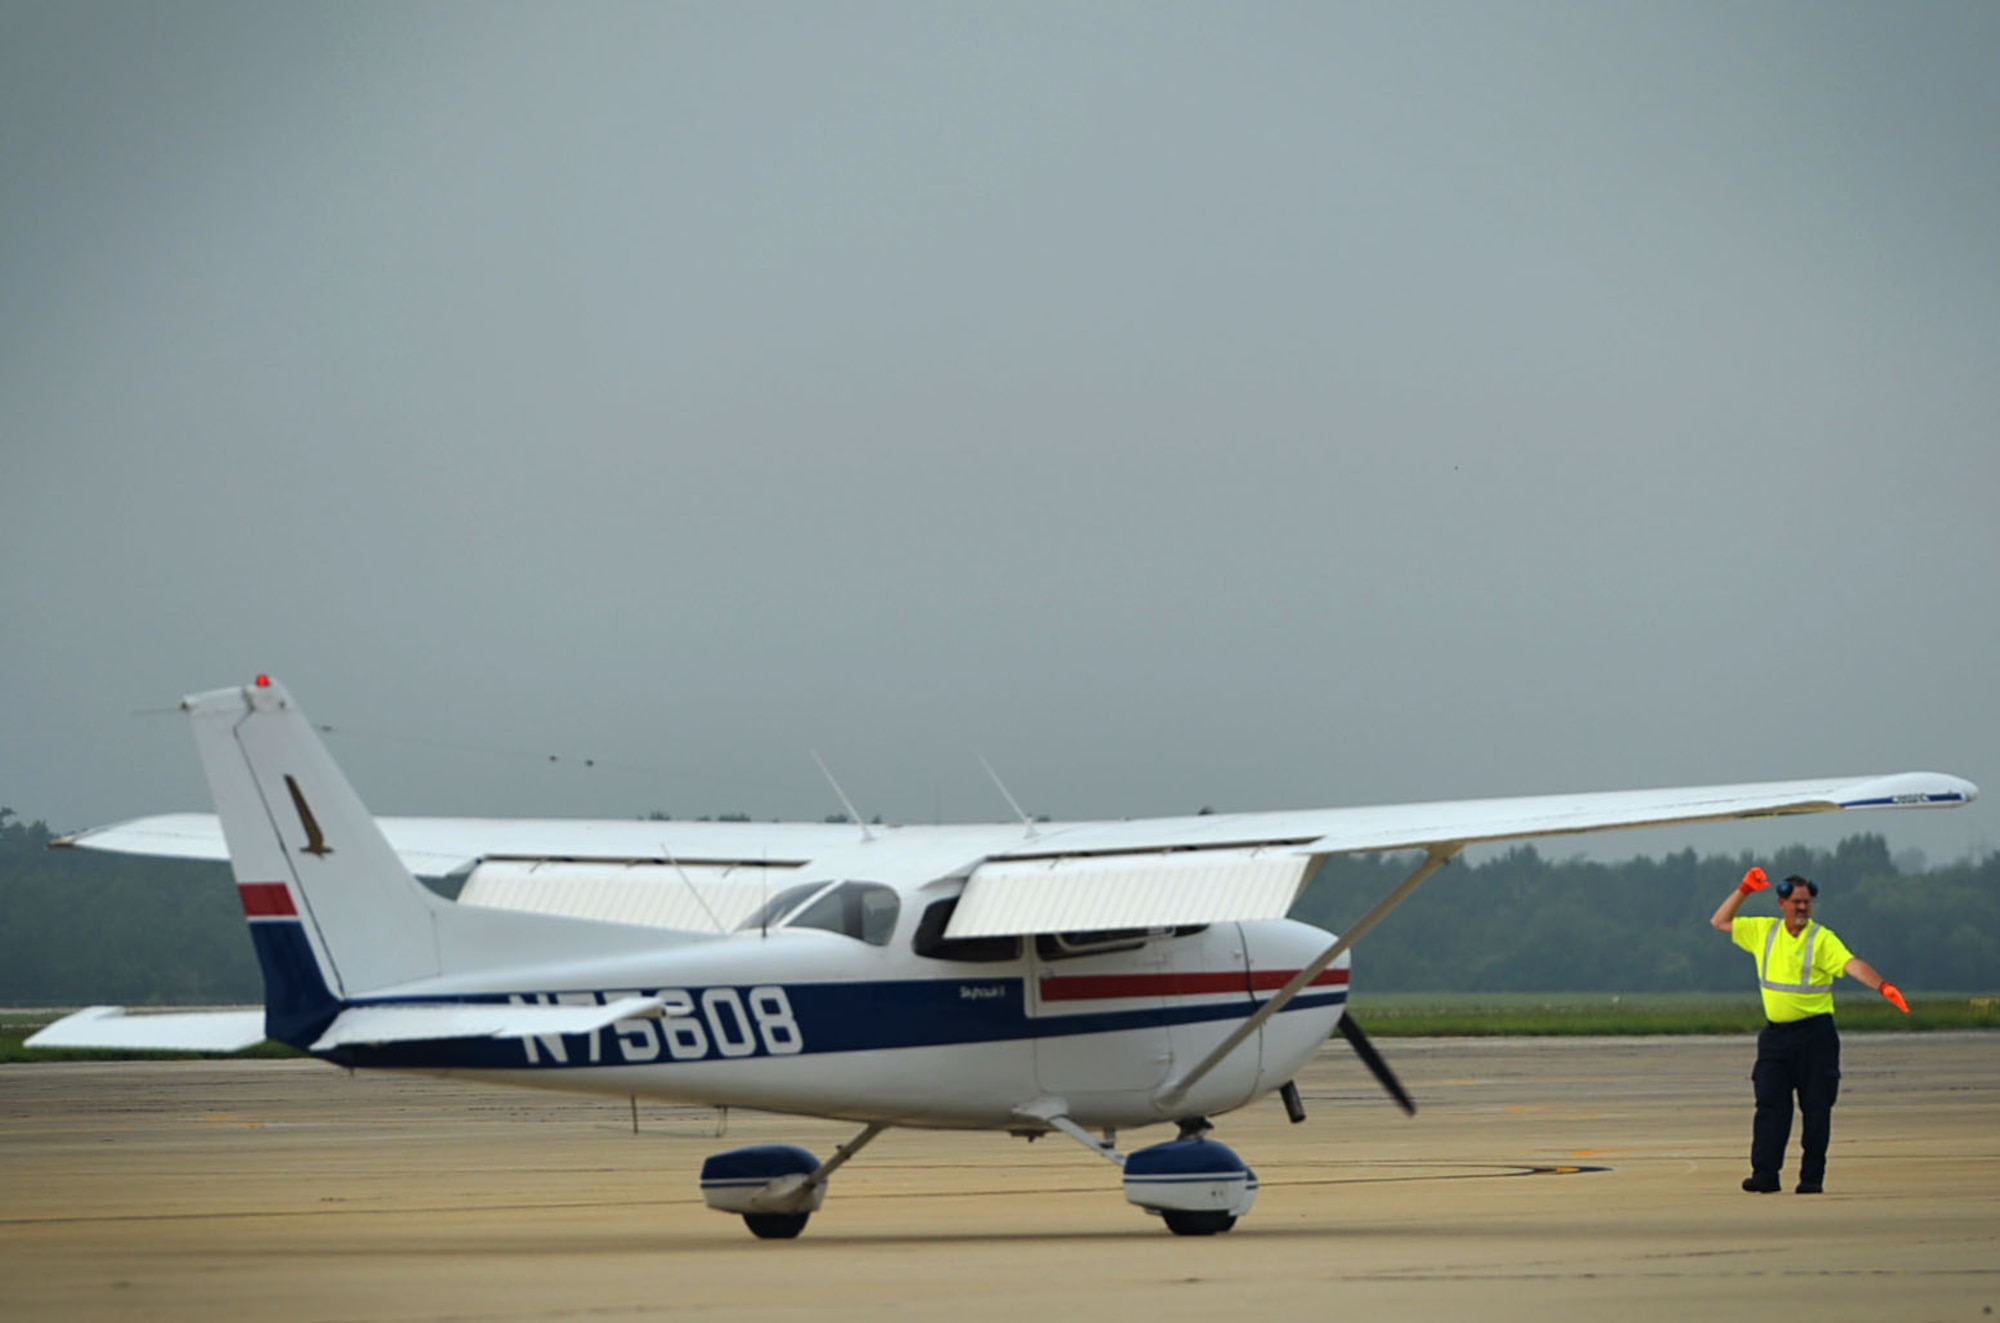 Tim Darrah, 20th Equipment Maintenance Squadron aircraft servicer, marshals a civilian Cessna 172, during a General Aviation Fly-in event at Shaw Air Force Base, S.C., July 28, 2017. The event gave the local aviation community an opportunity to land aircraft at Shaw and learn about the 20th Fighter Wing mission. (U.S. Air Force photo by Senior Airman Christopher Maldonado)